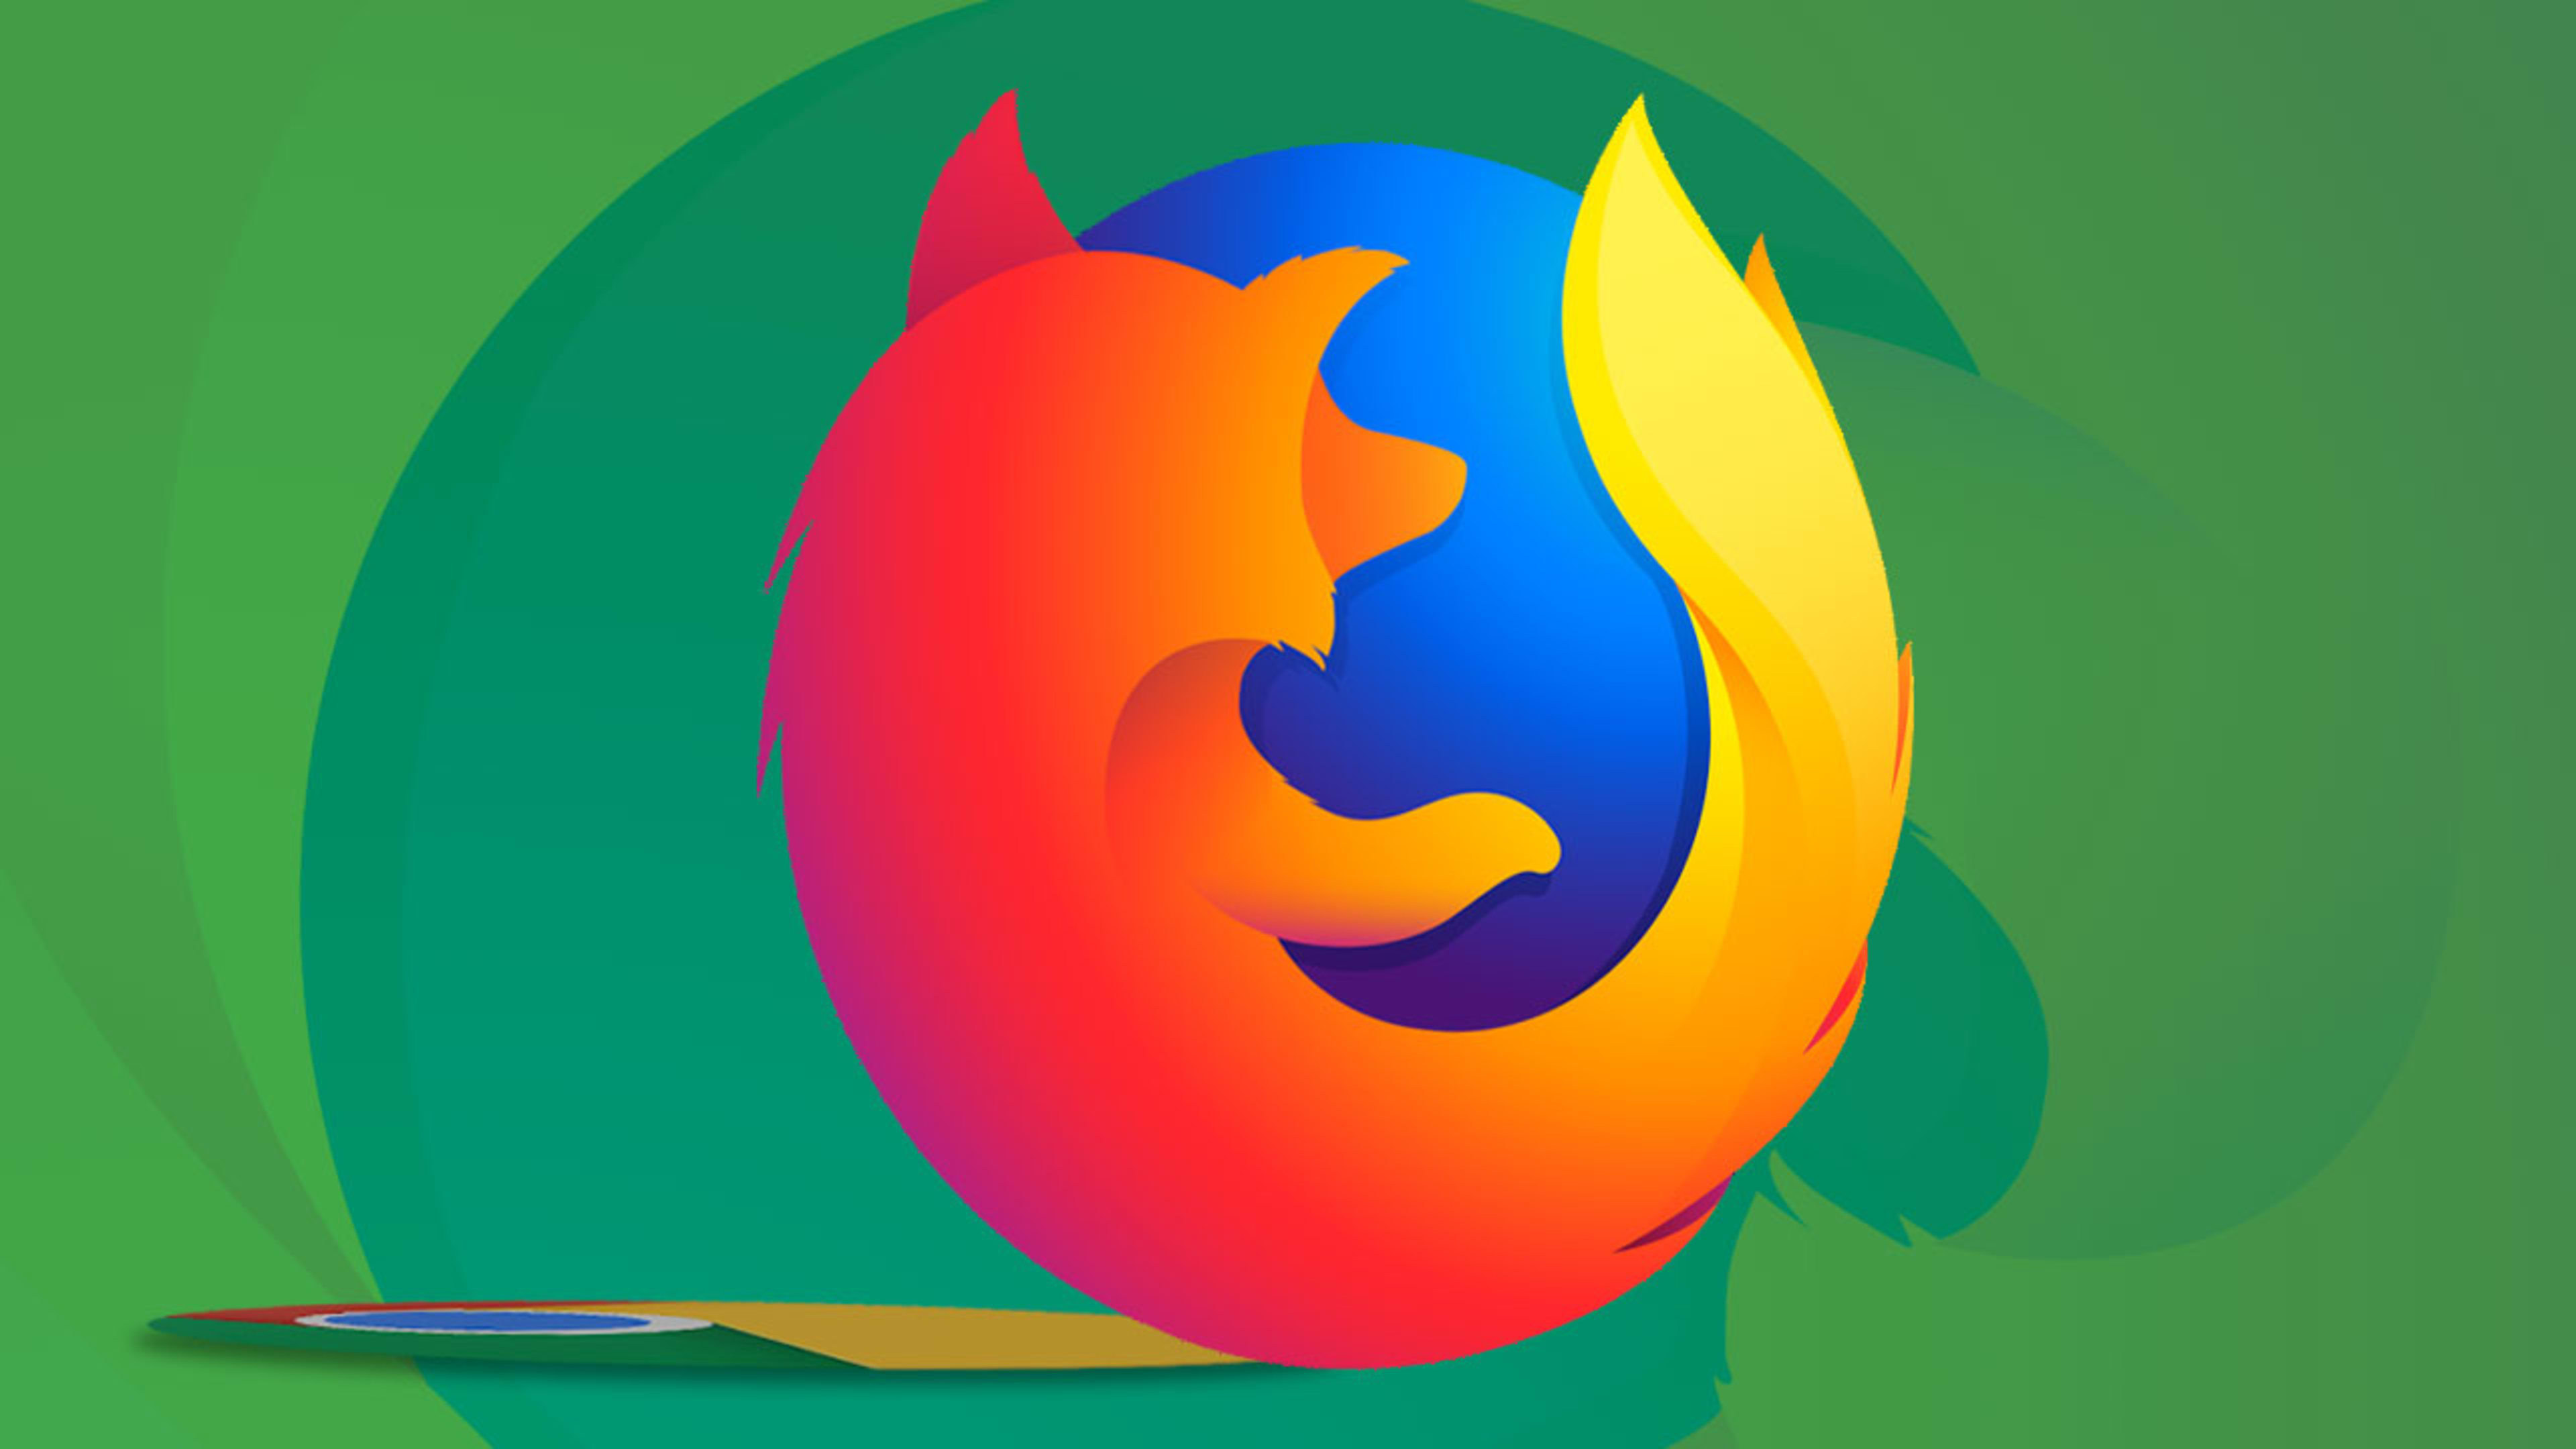 These 17 Firefox tips make it easy to switch from Chrome